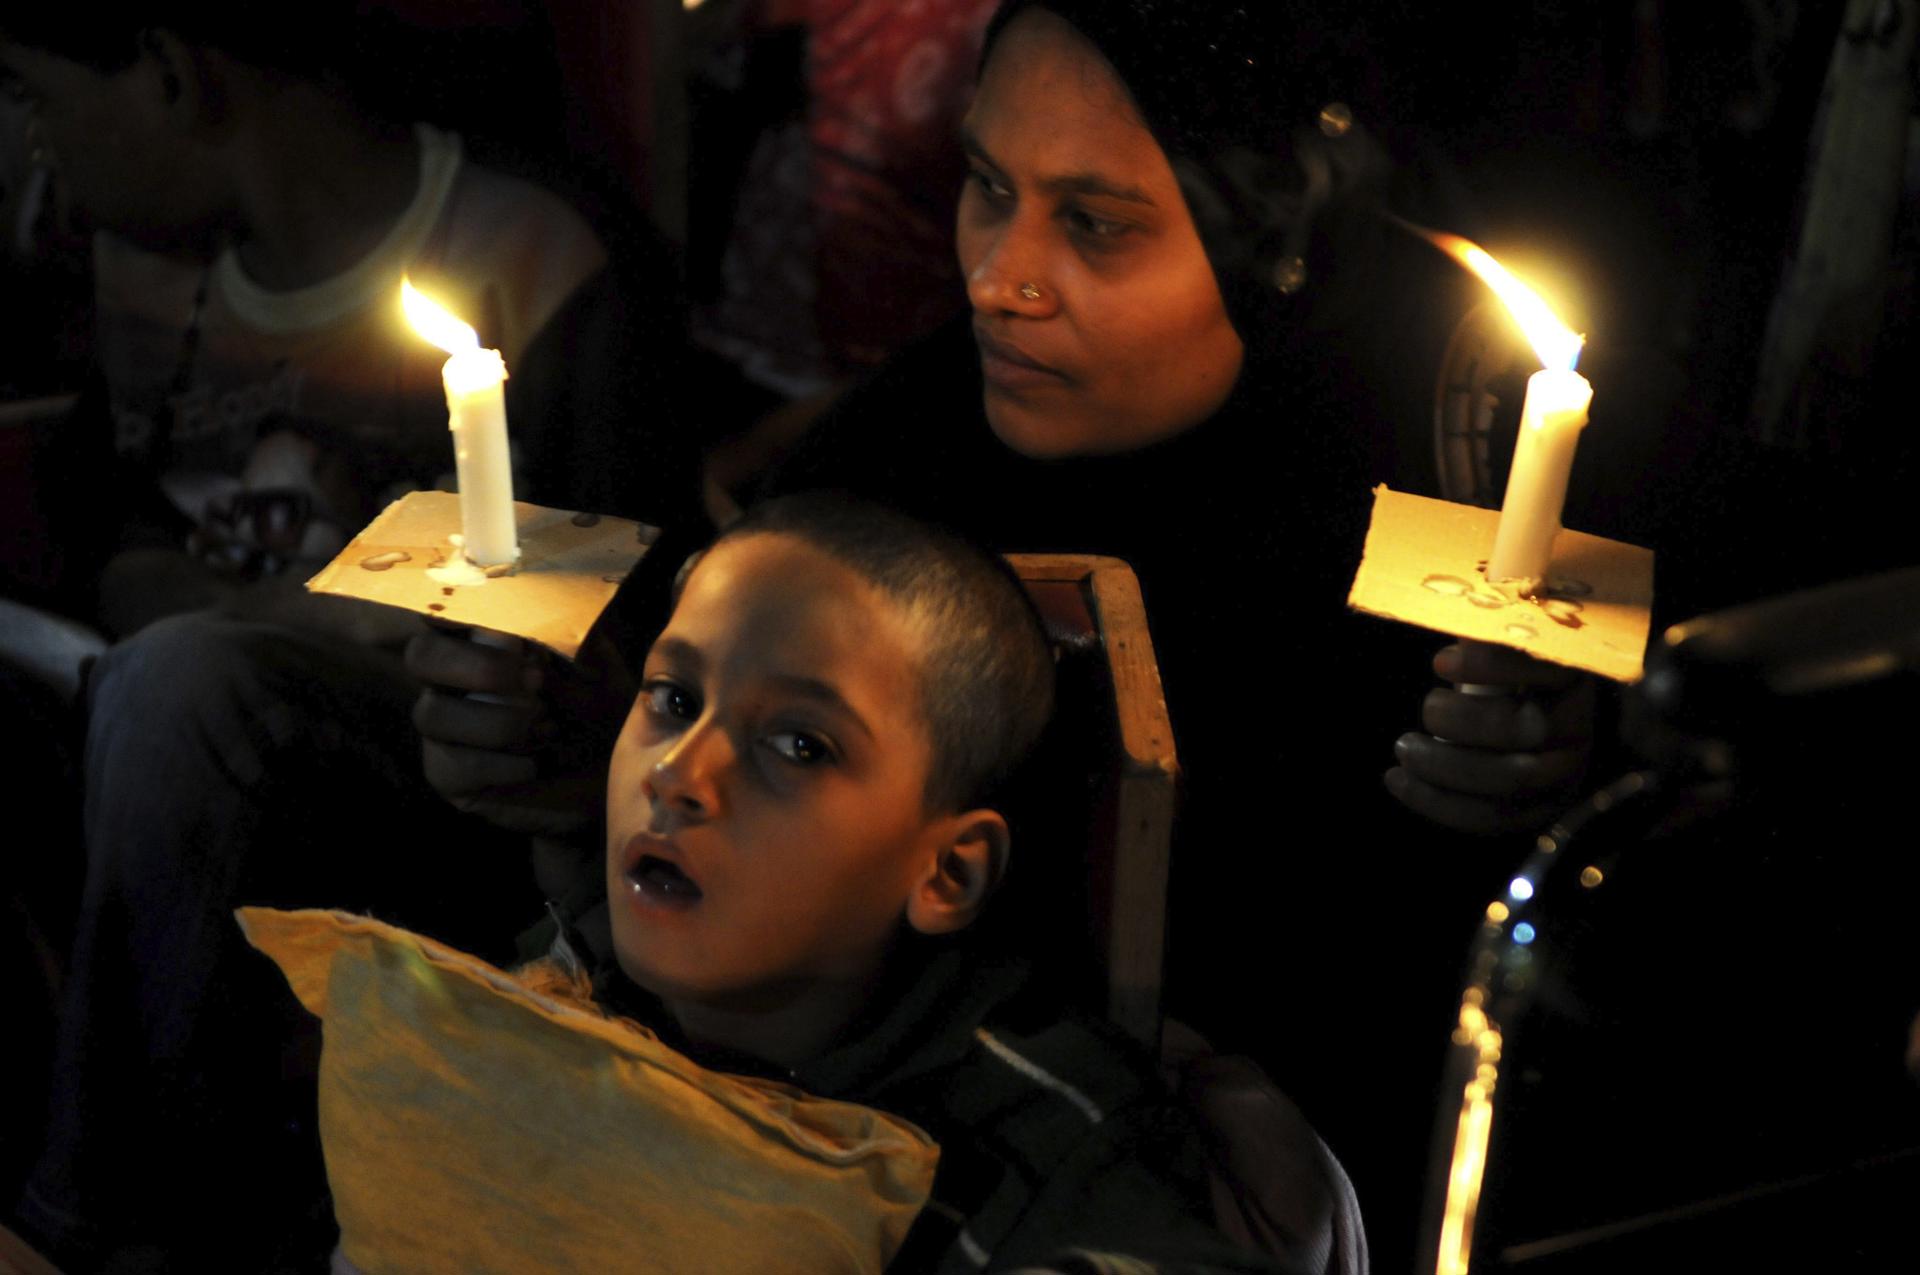 A child who was born with congenital deficiencies due to the leak of 42 tons of methyl isocyanate participates in a vigil in Bhopal, India December 1, 2015. EFE/File/Sanjeev Gupta